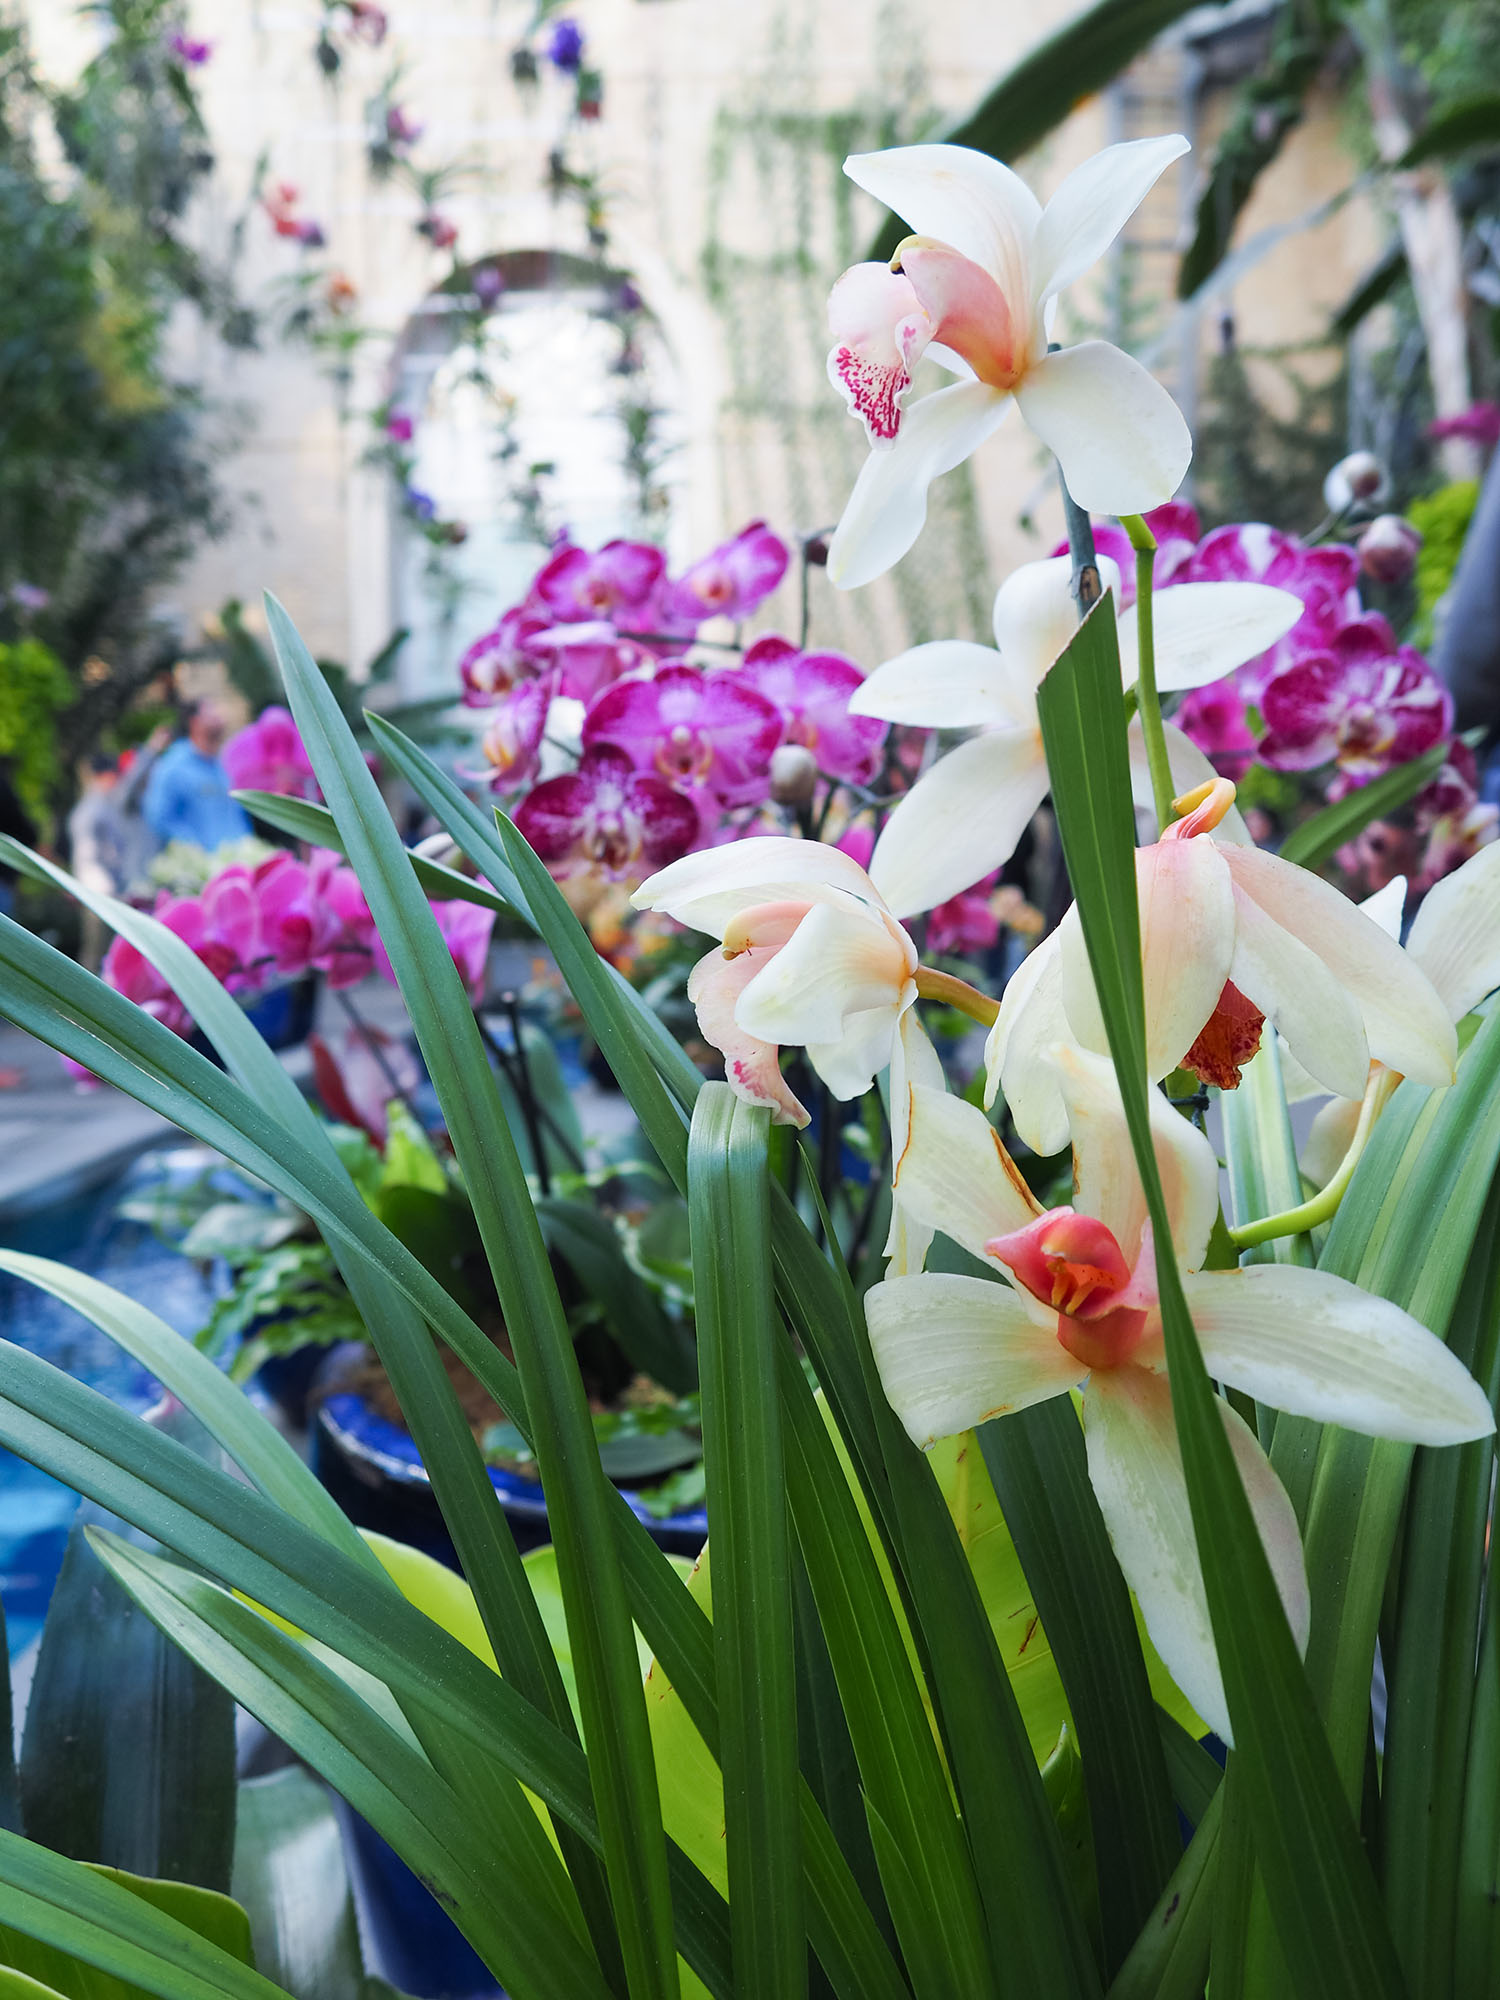 Multicoloured orchids at the United States Botanic Garden in Washington DC, as photographed by Winnipeg travel blogger Cee Fardoe of Coco & Vera